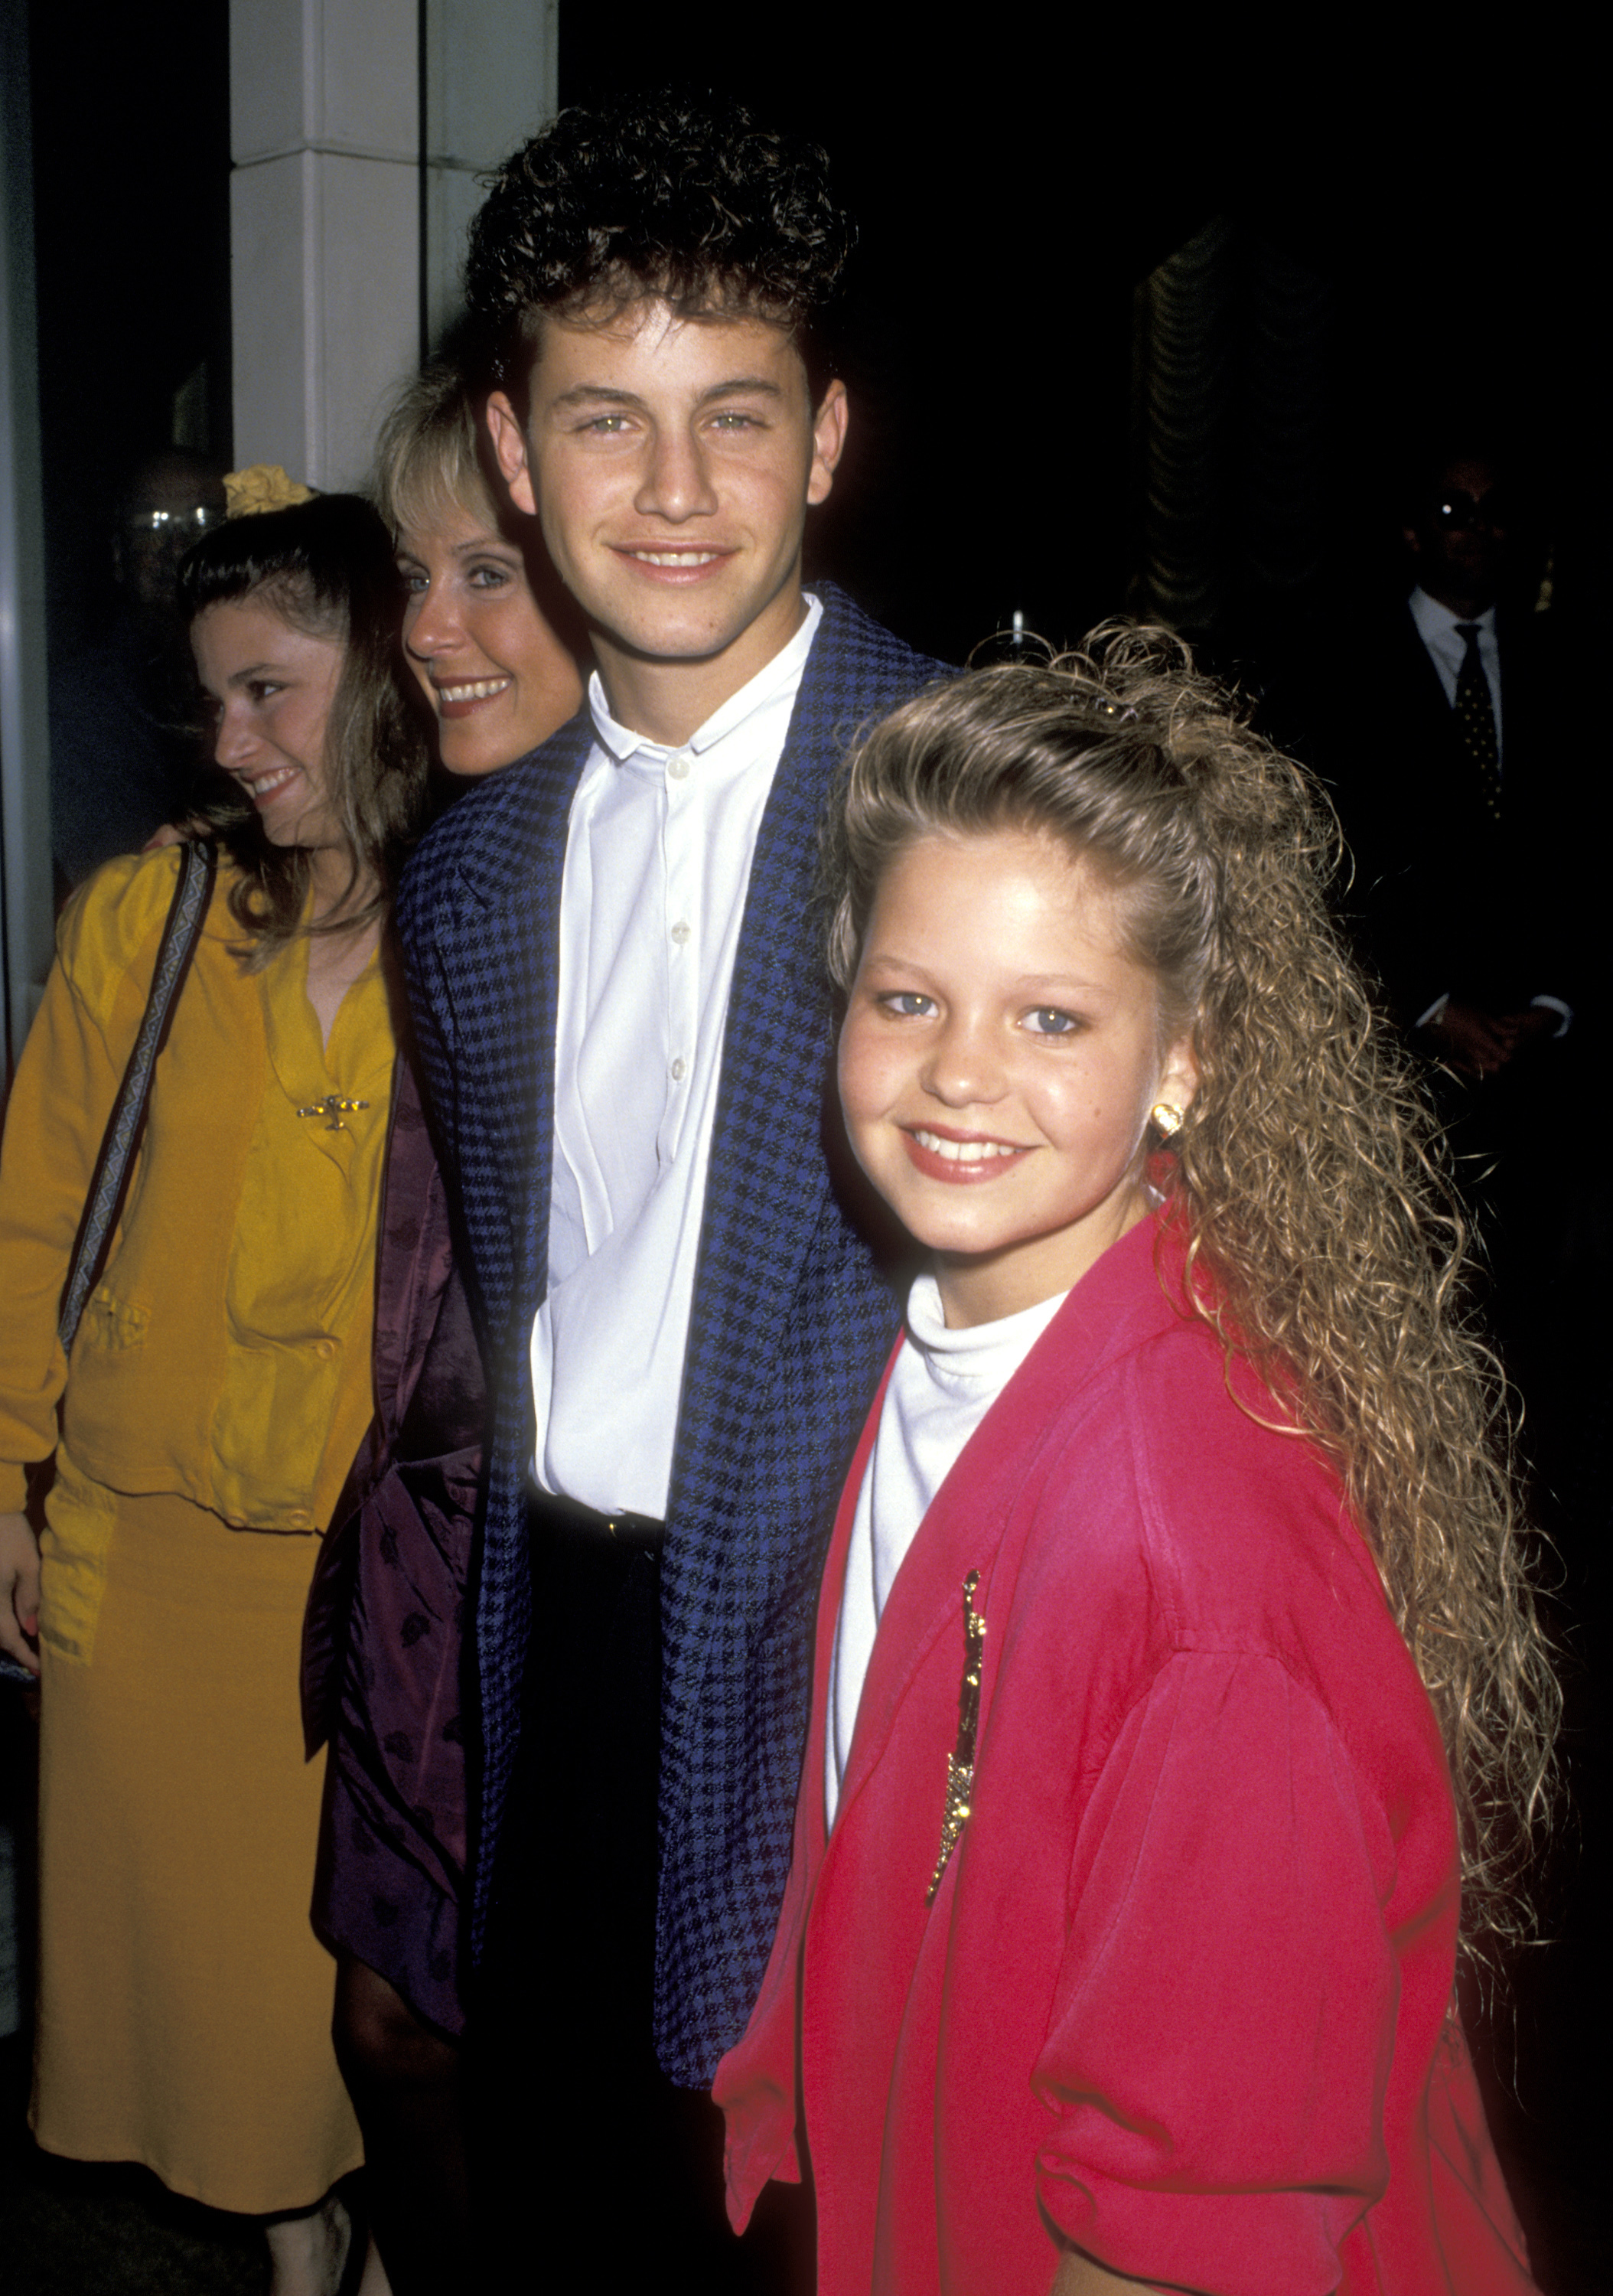 Actress Candace Cameron and Actor Kirk Cameron in Pasadena, California on June 11, 1989 | Source: Getty Images